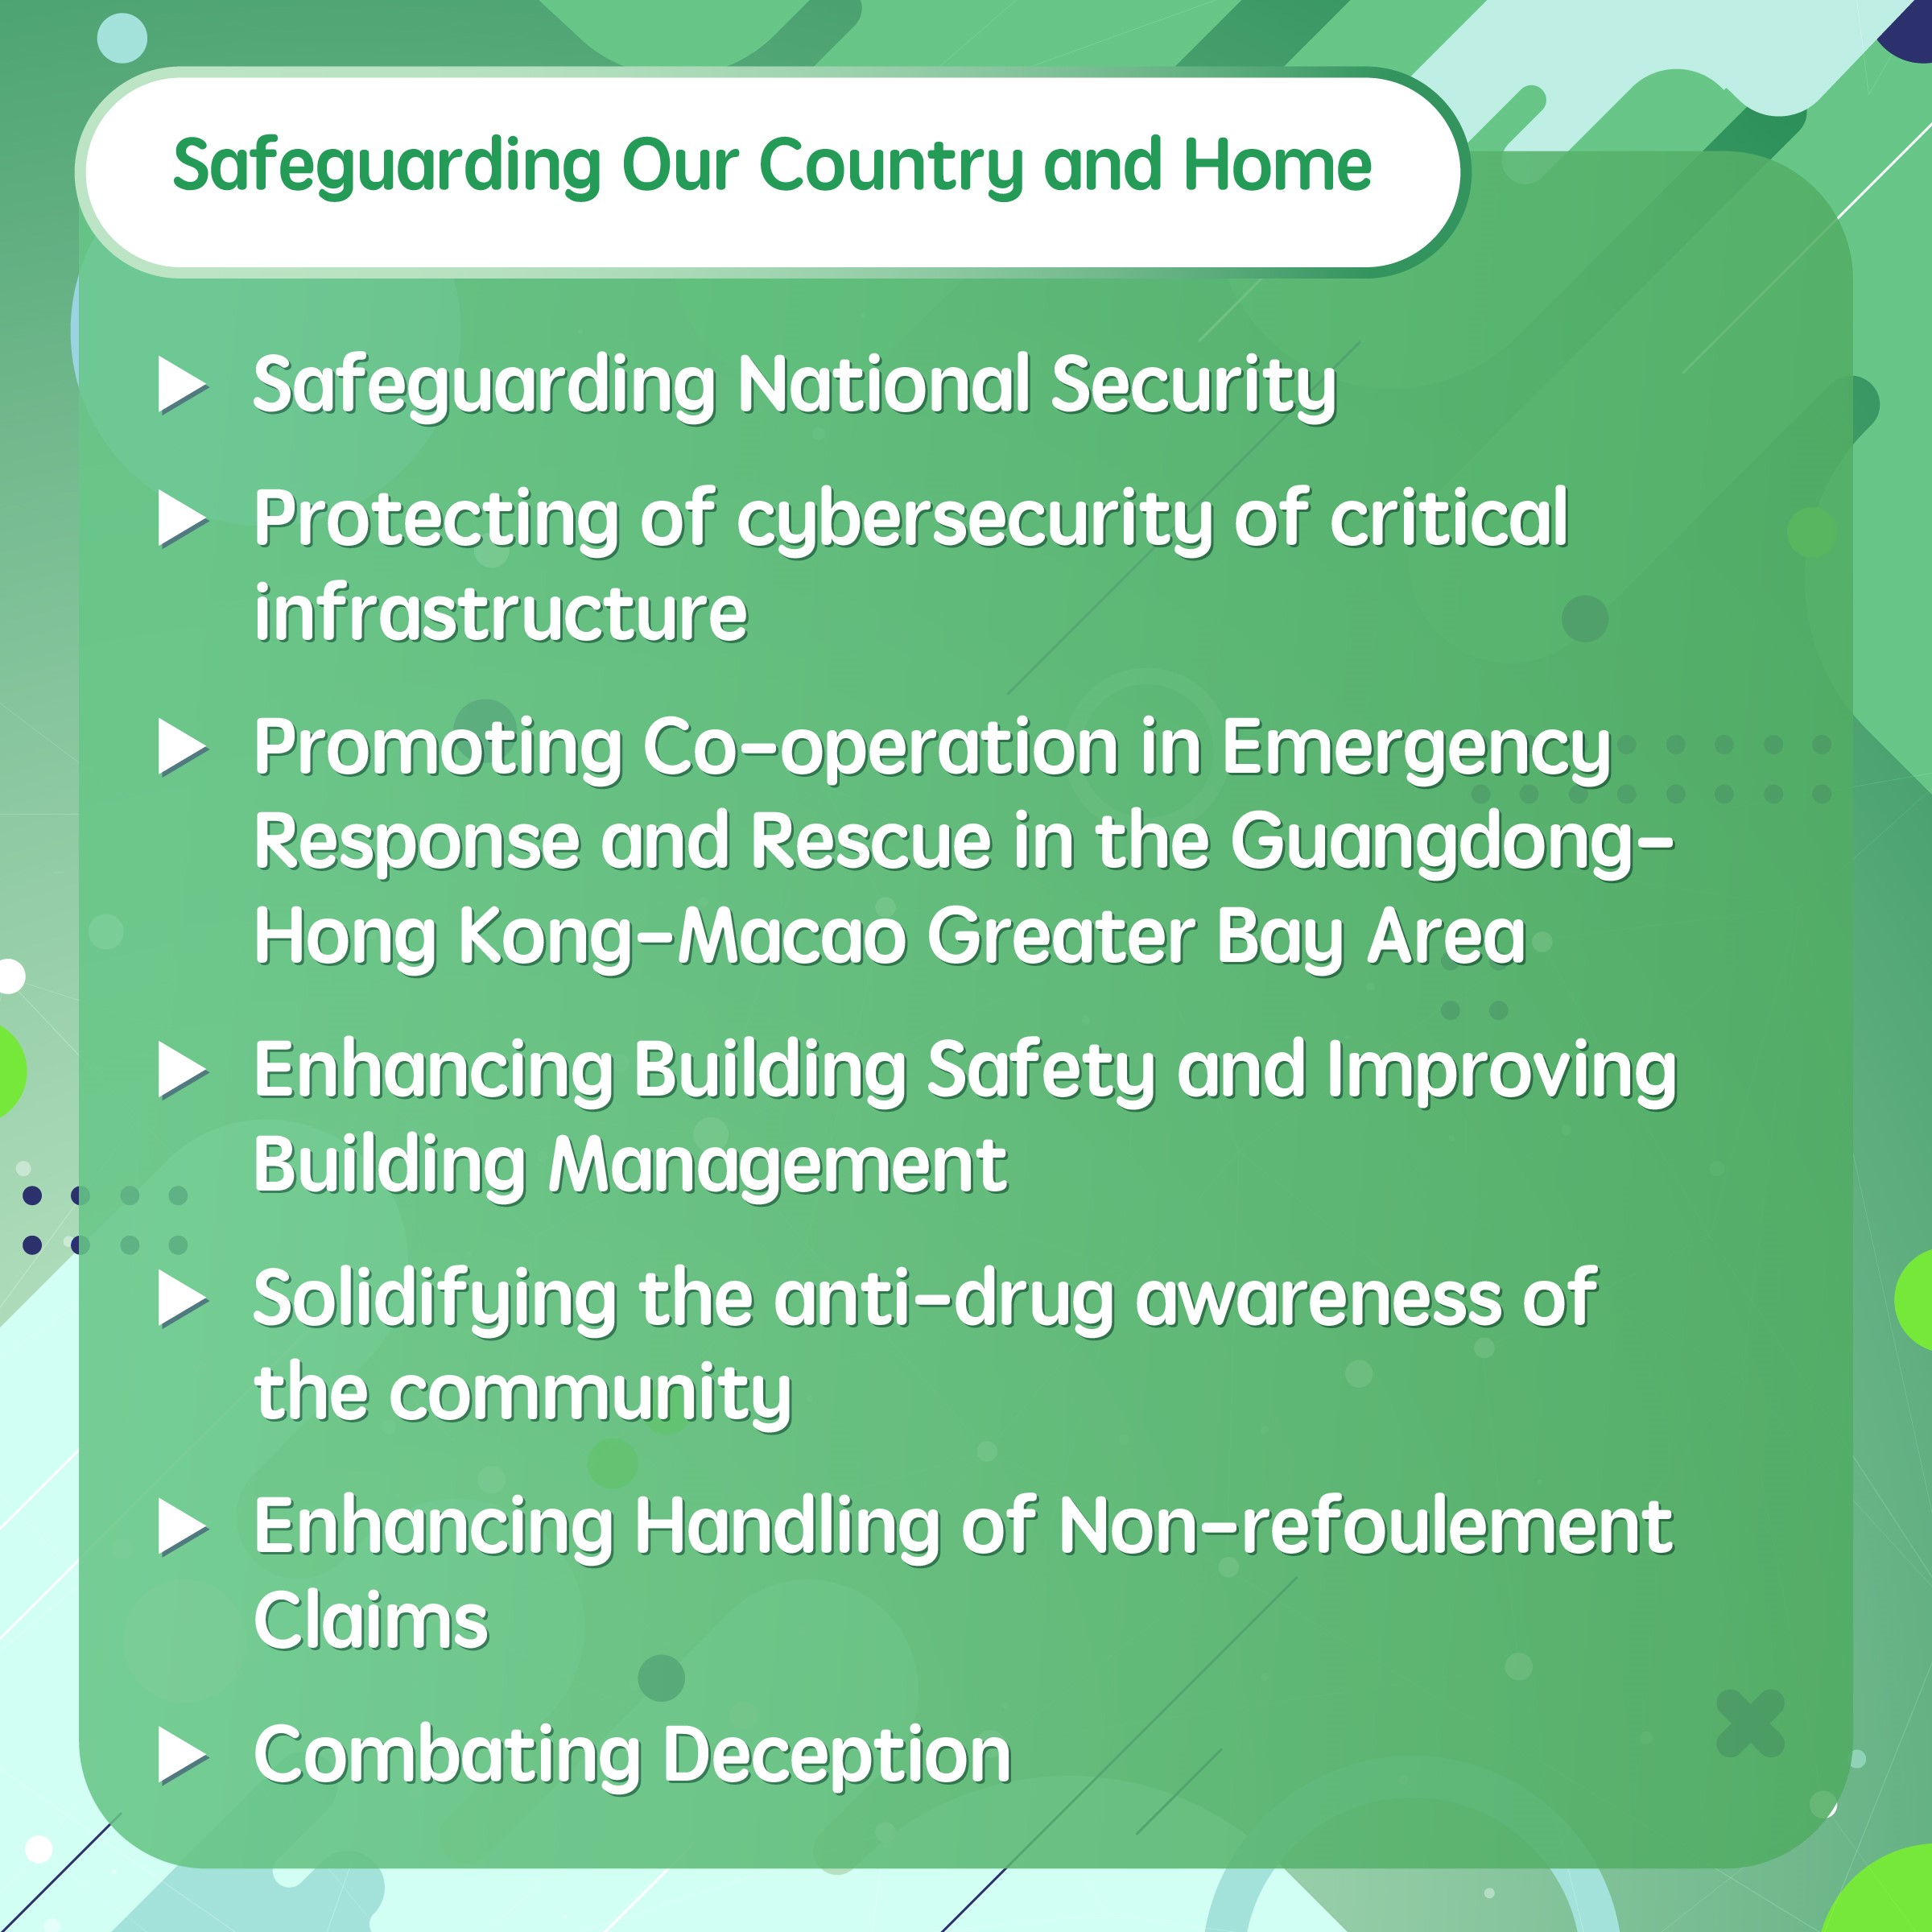 Safeguarding Our Country and Home